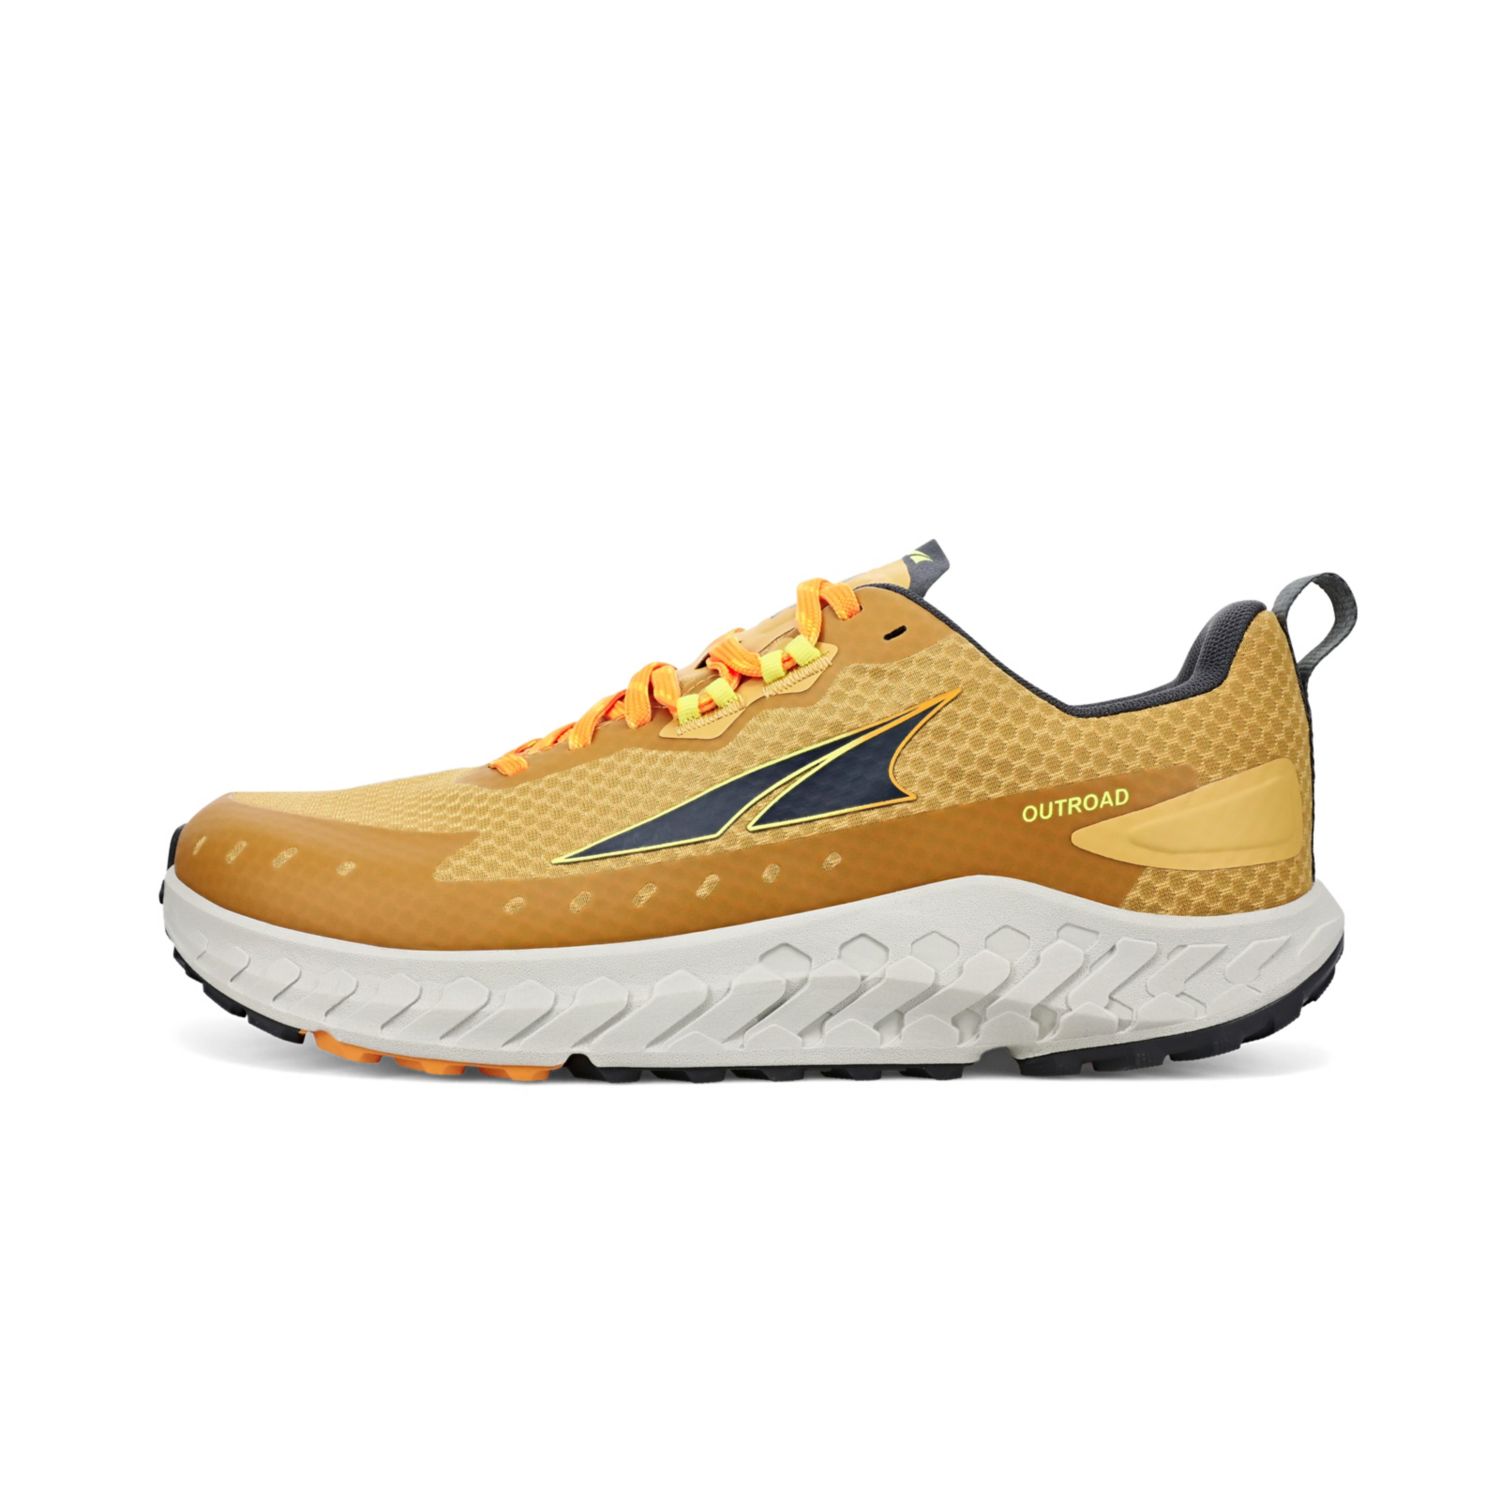 Grey / Yellow Altra Outroad Men's Road Running Shoes | Ireland-39567819